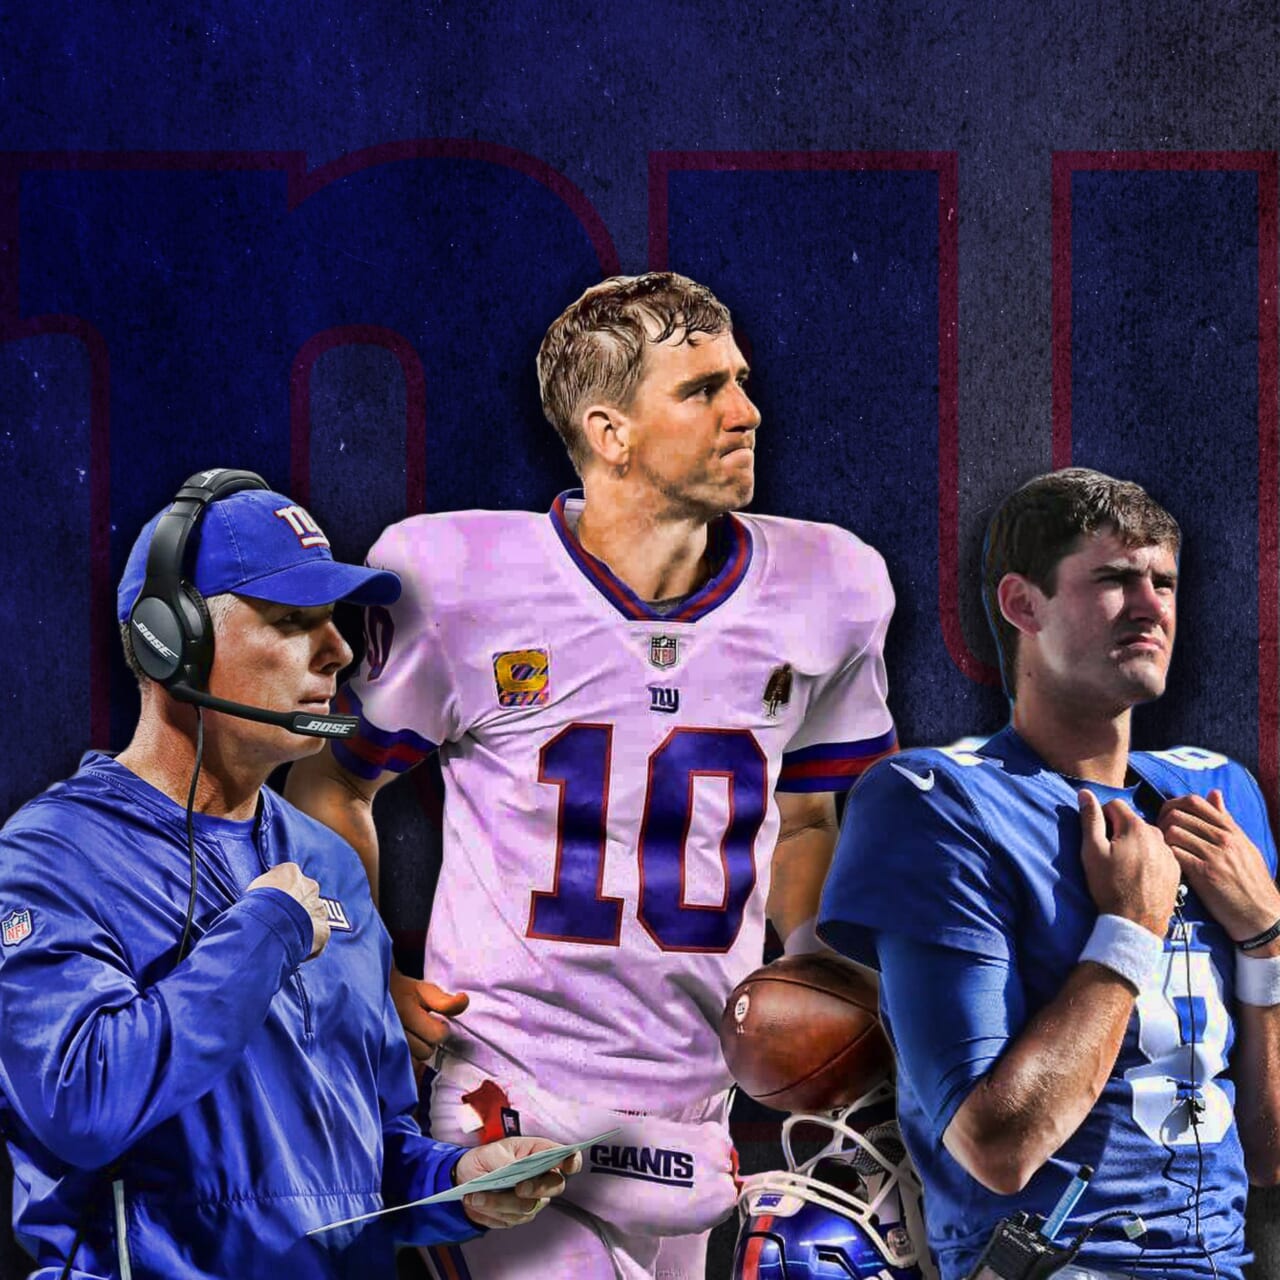 New York Giants: For The First Time, The Giants Are Noncommittal on Eli Manning